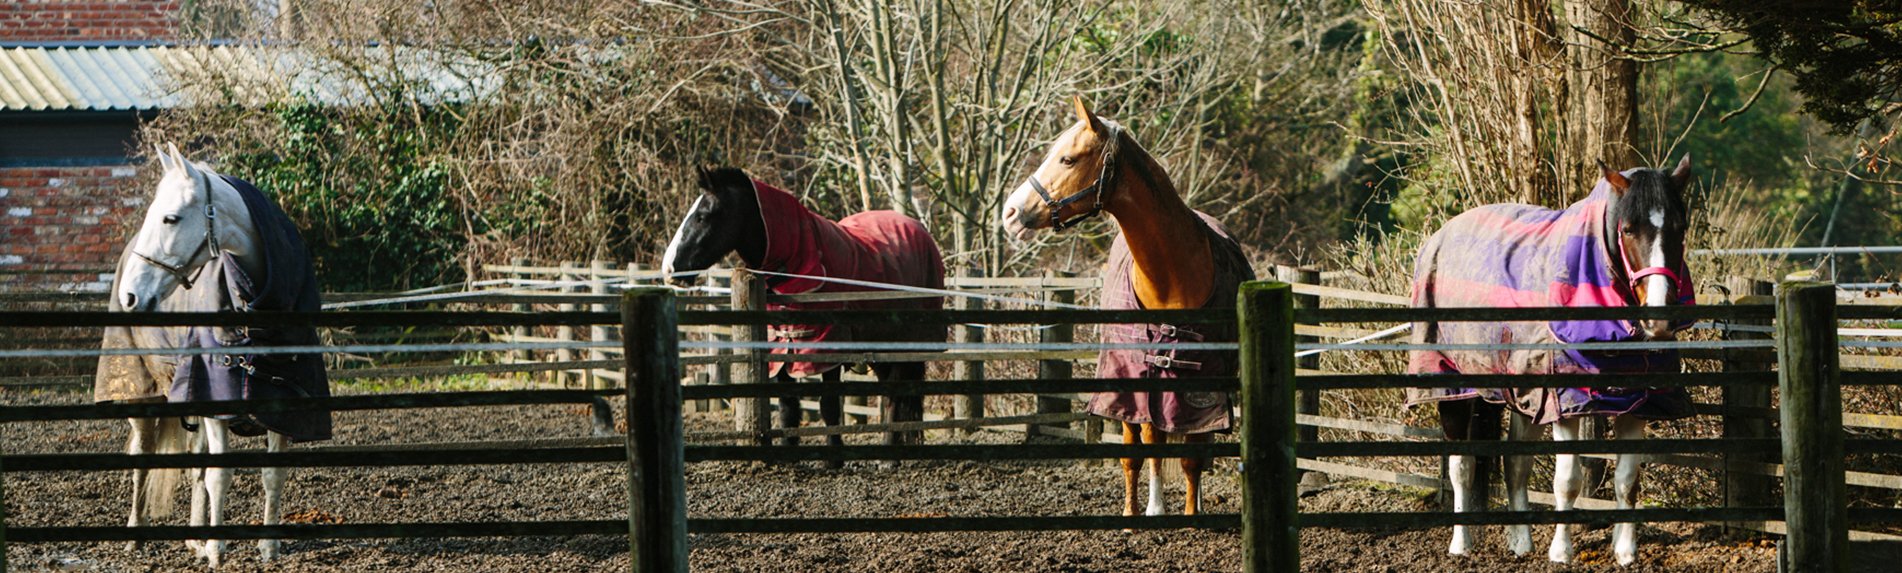 Larton Livery Horse Stables & Turnout